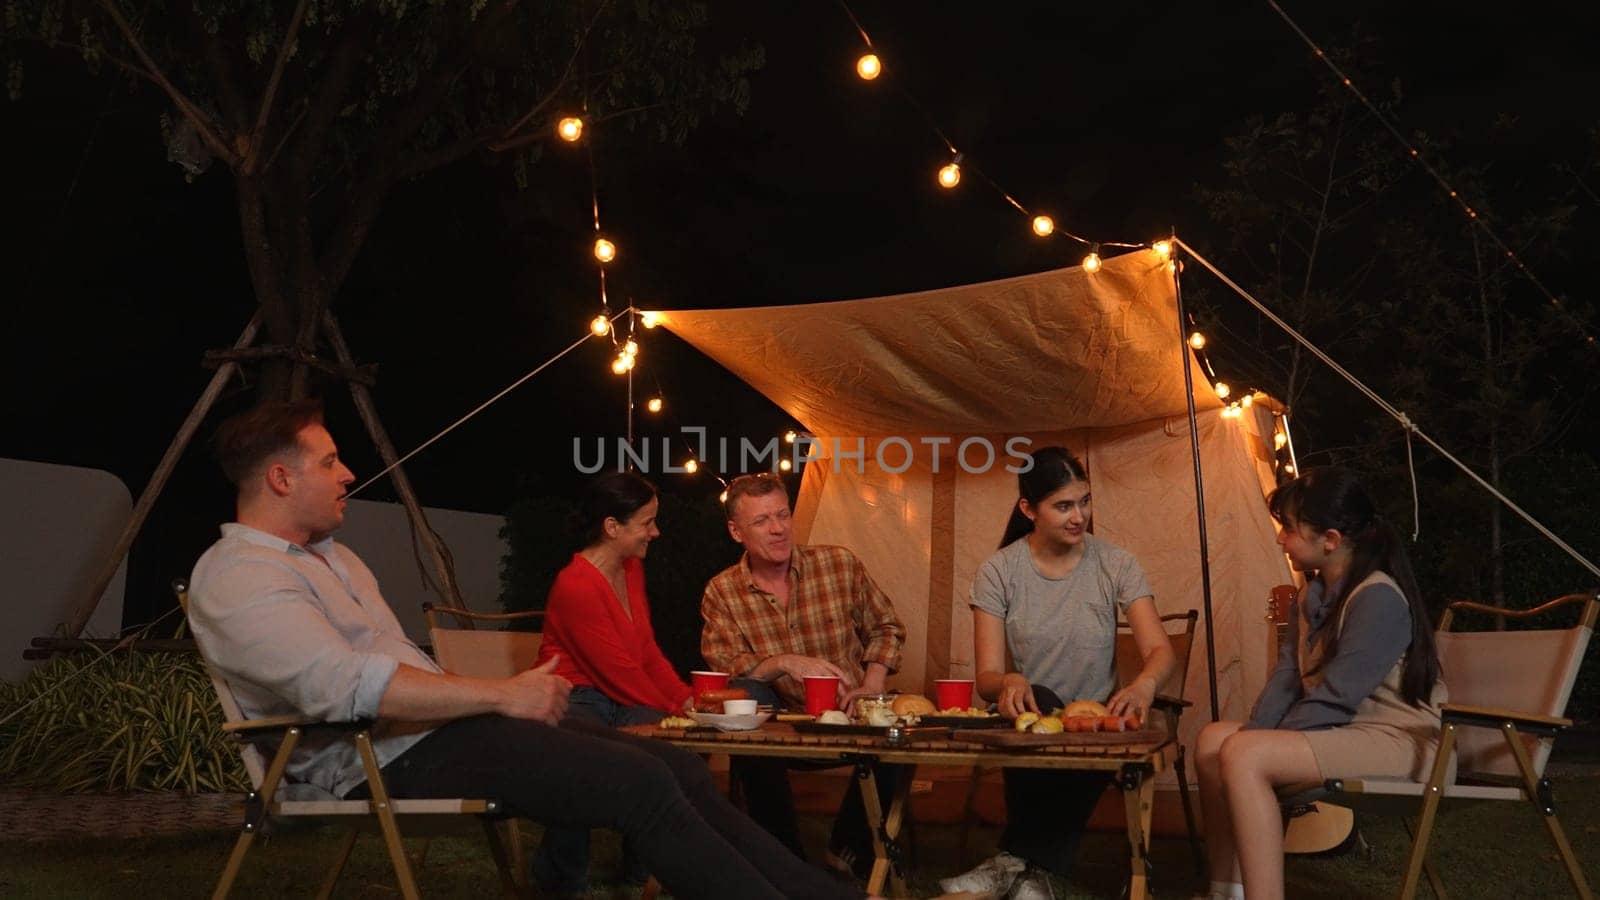 Family gather for holiday celebration in garden. Family member gather have dinner. Outdoor camping activity to relax with food and spend time with younger generation cross generation gap. Divergence.